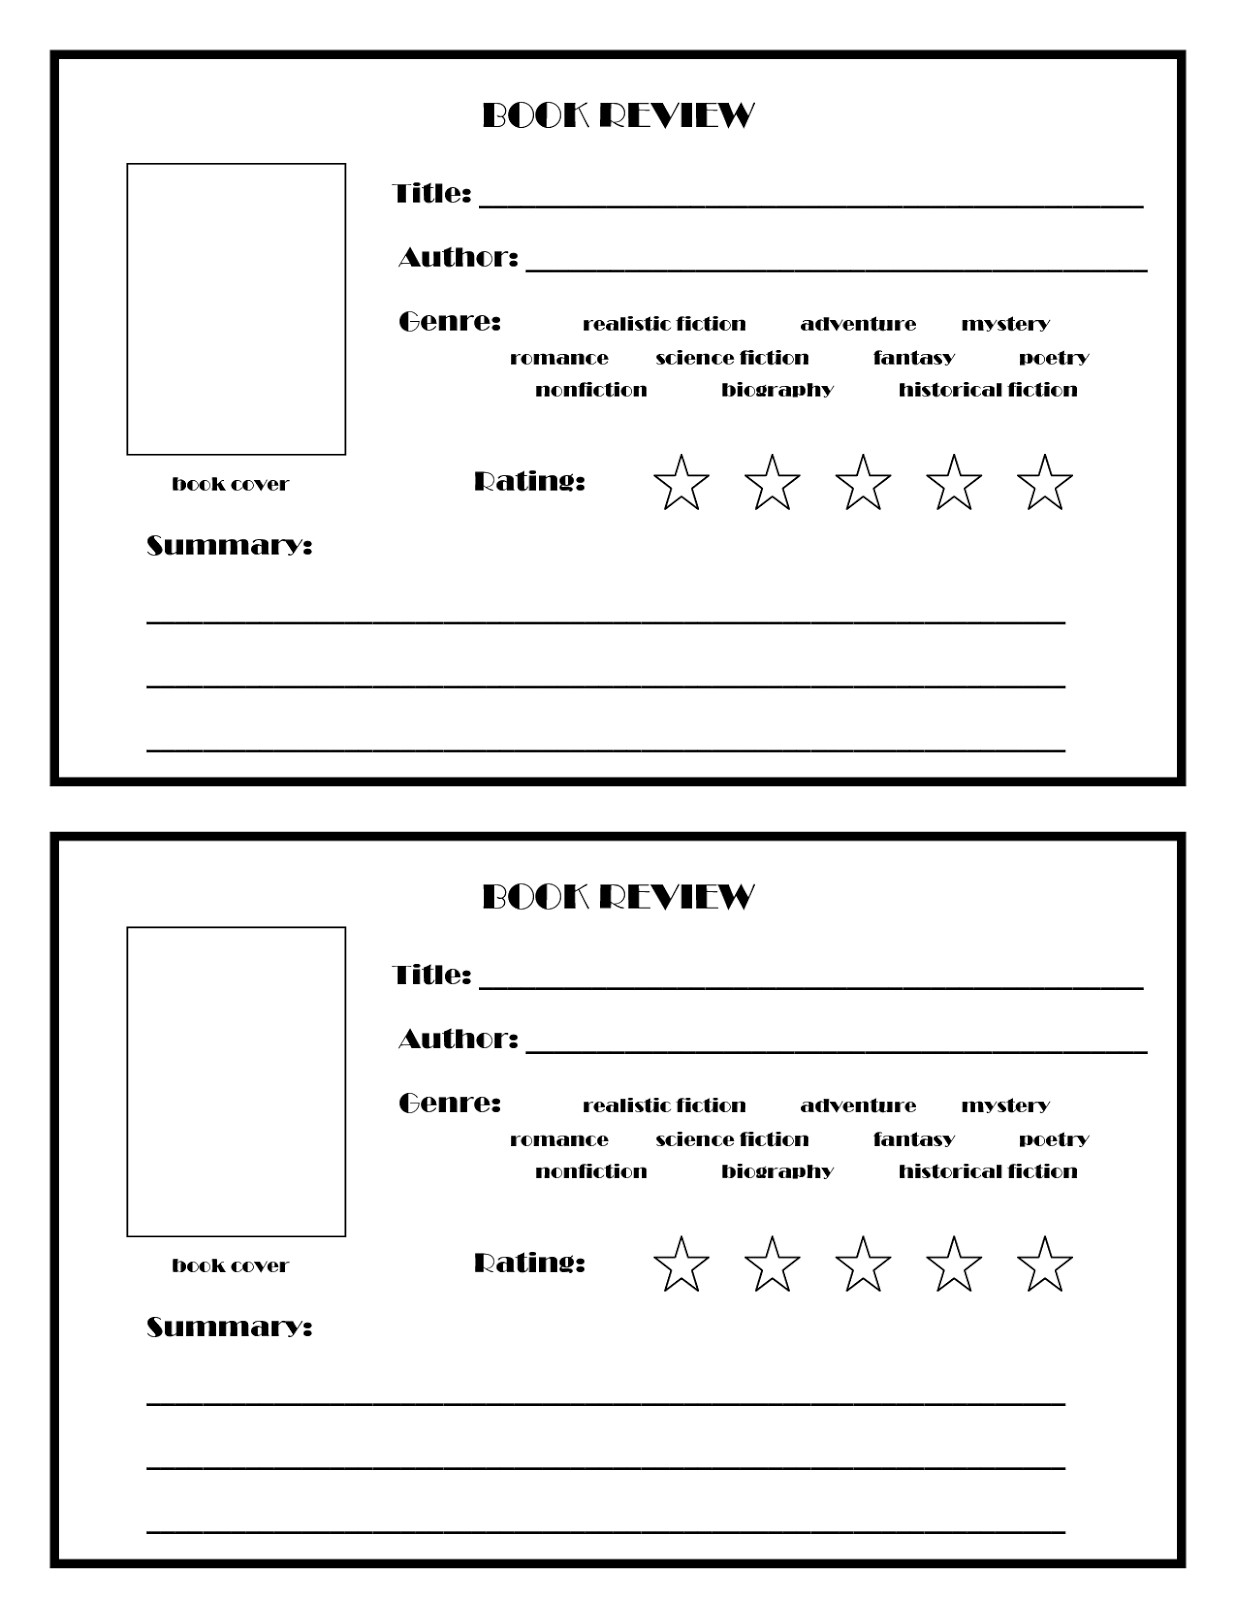 printable-book-review-form-printable-forms-free-online